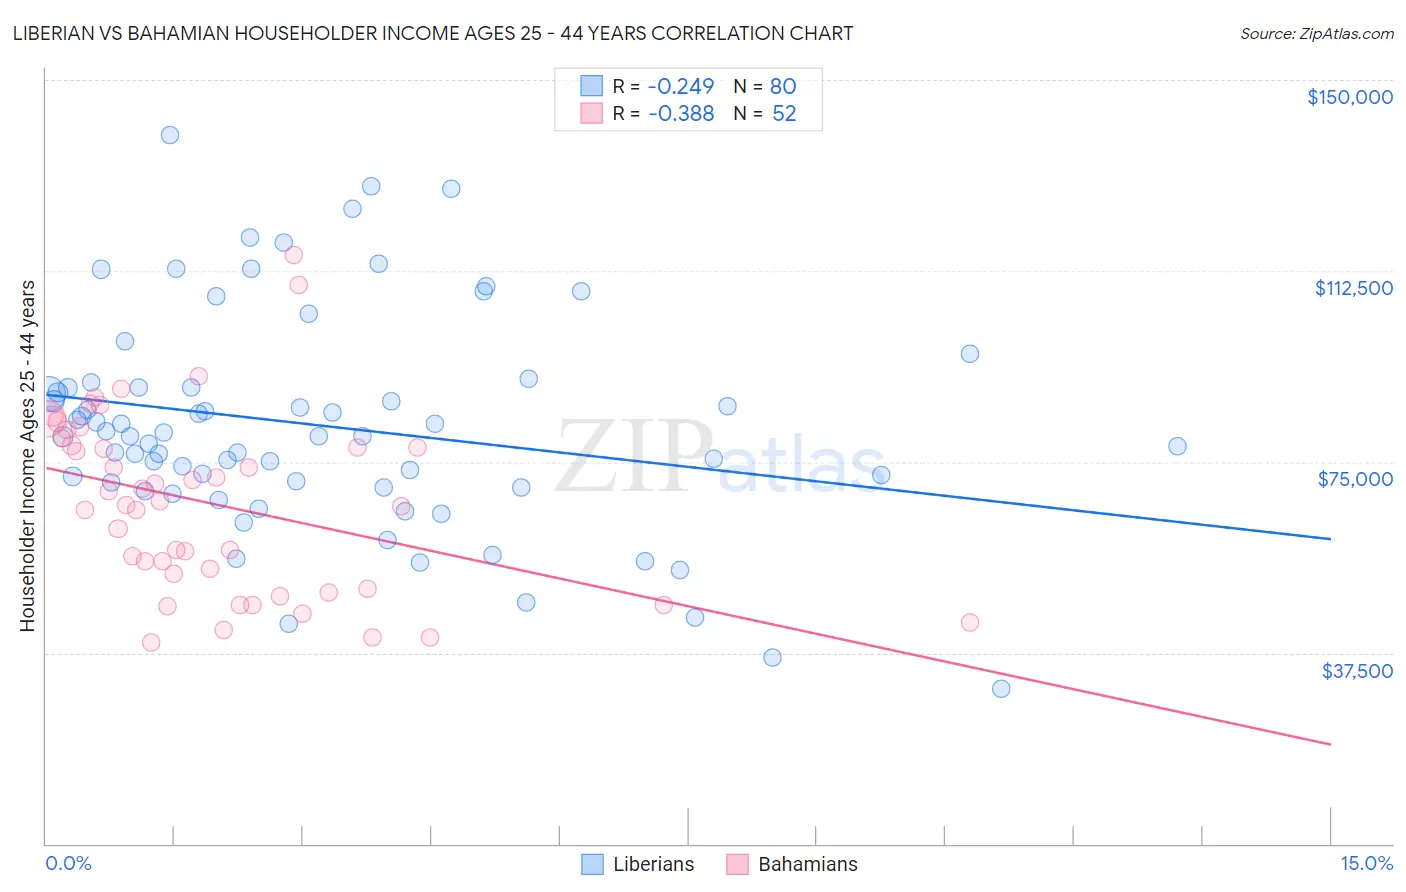 Liberian vs Bahamian Householder Income Ages 25 - 44 years